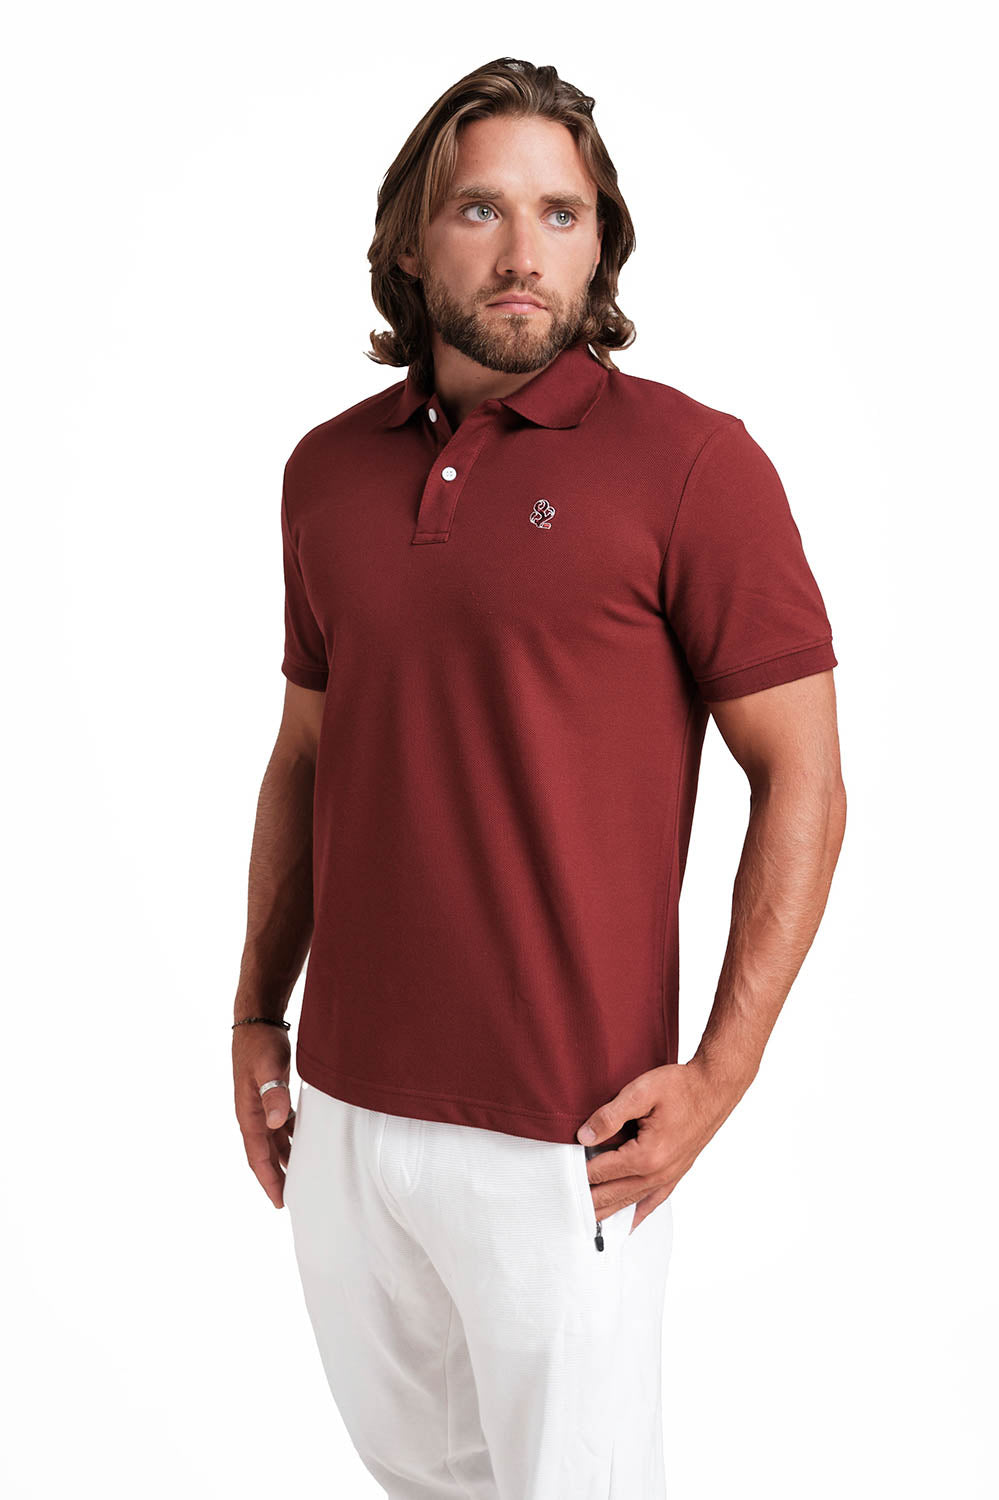 Polo Cordovan T-shirts with Front Embroidery, Solid pique fabric